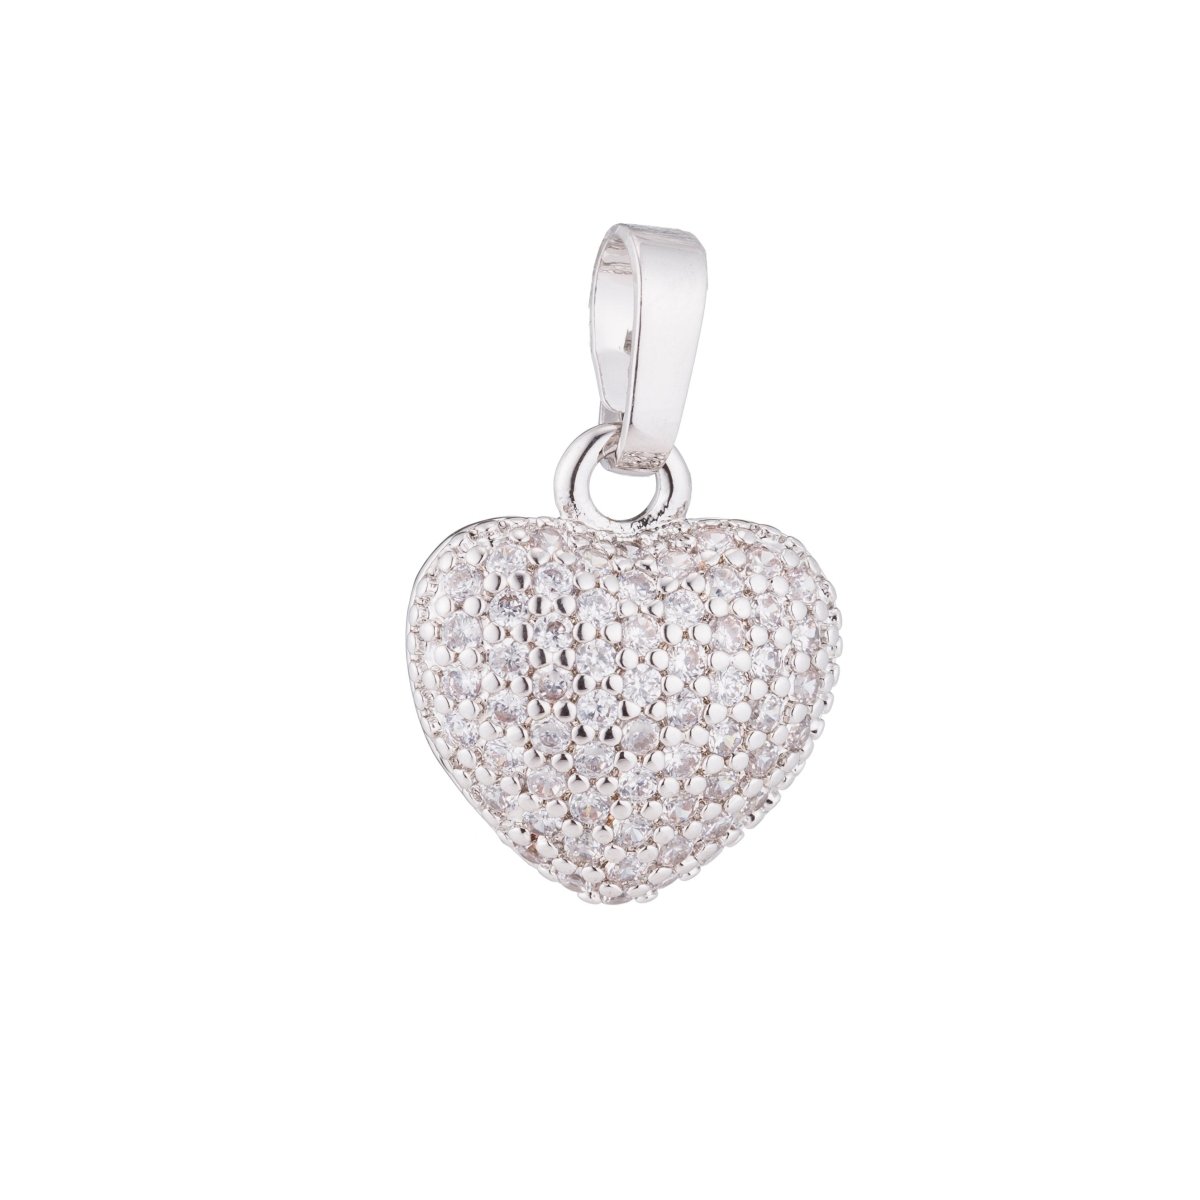 White gold fill Heart Love 3D charm Romantic Gifts DIY Craft Cute Cubic Zirconia Necklace Pendant Bead Bails Findings for Jewelry Making H-322 - DLUXCA